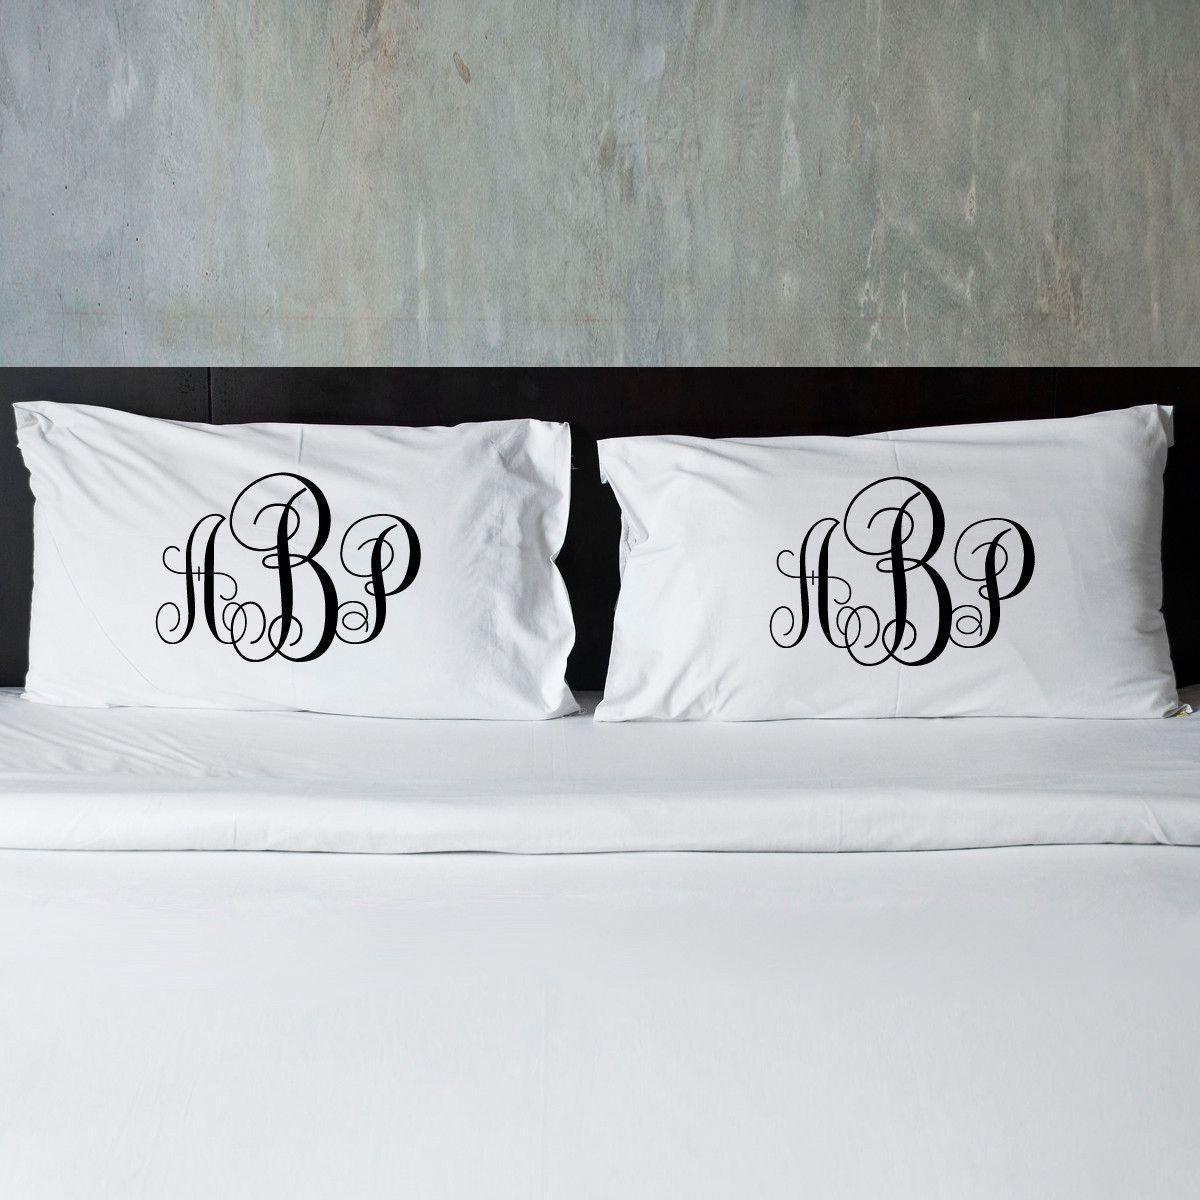 Personalized Interlocking Monogram Pillow Cases for Couples